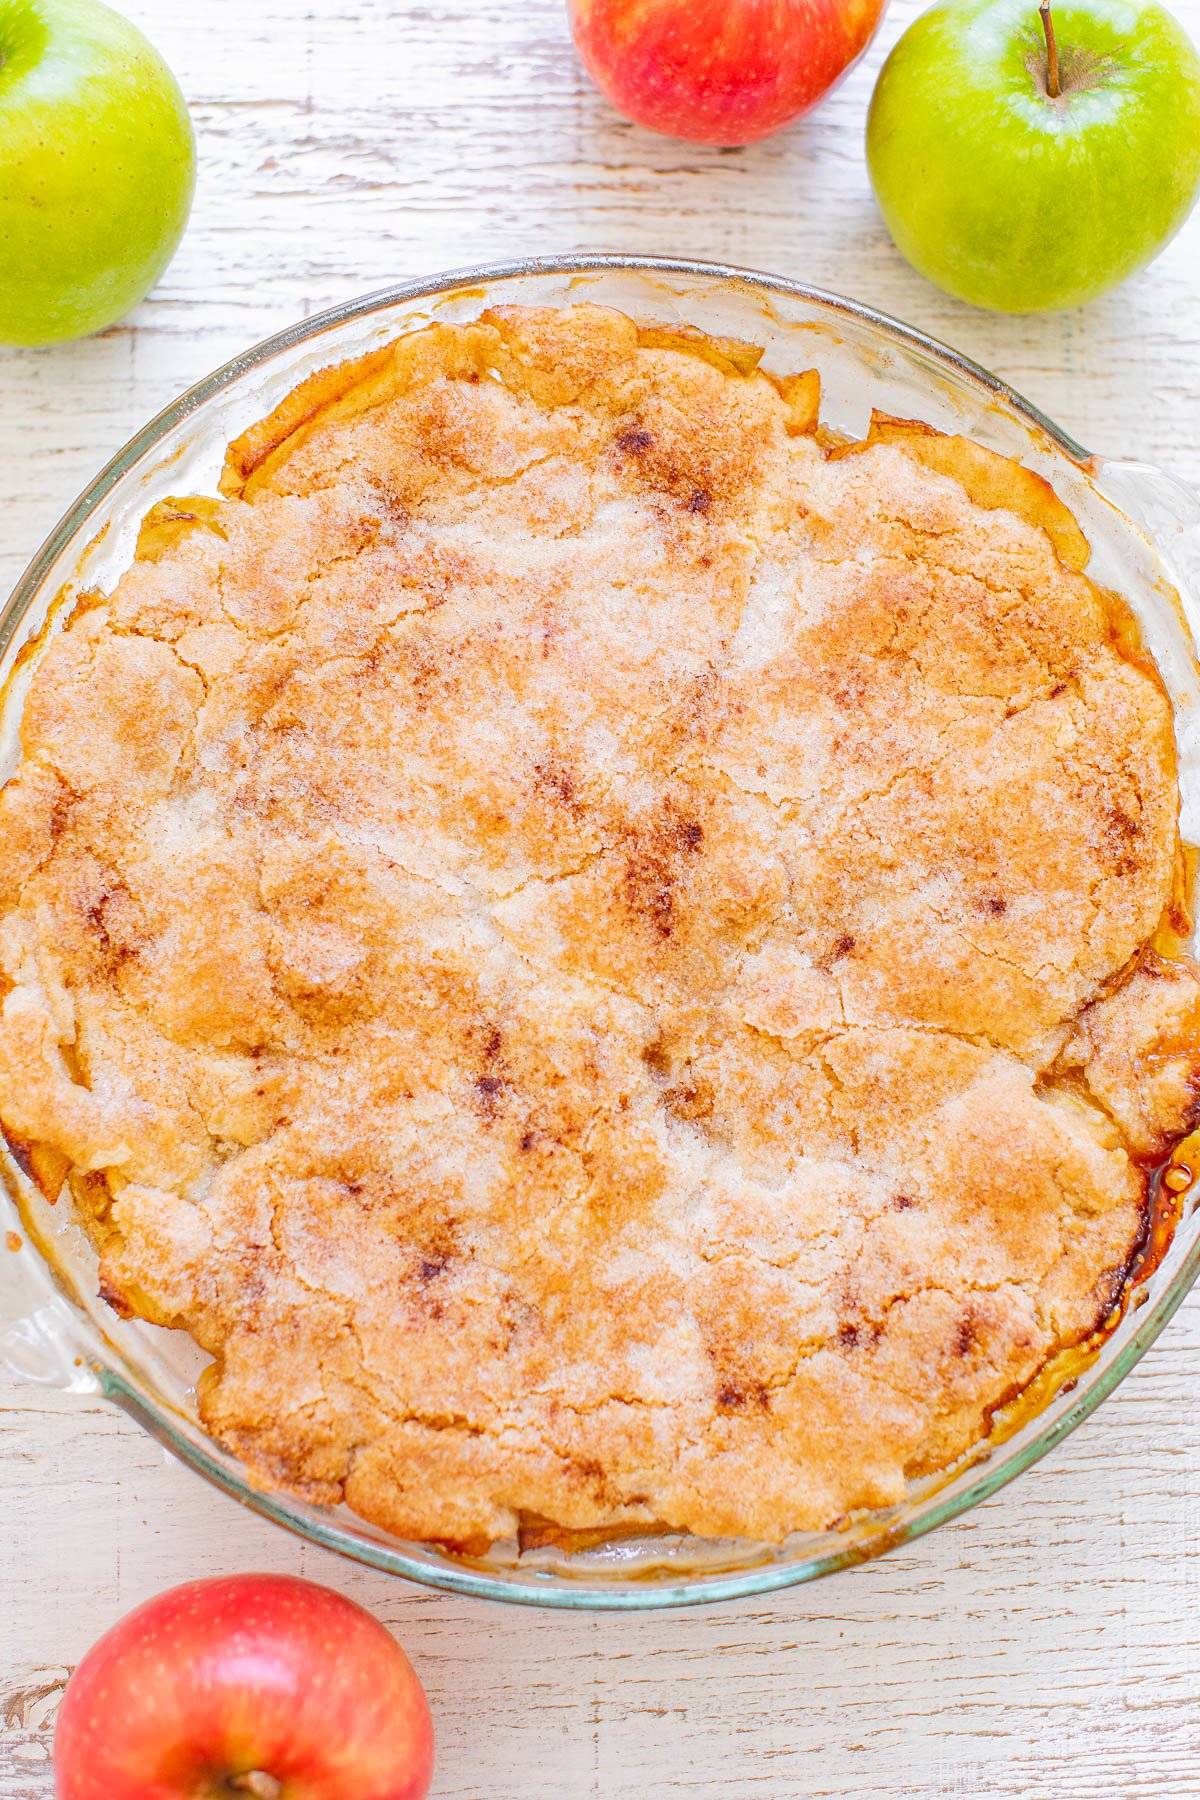 Crustless Apple Pie - Sometimes called Swedish apple pie, this EASY recipe for apple pie without a traditional pie crust is a FAST, foolproof, no-mixer recipe! It's loaded with cinnamon-spiced apples in every bite, dense, chewy, hearty, and is next level when topped with ice cream and salted caramel sauce!